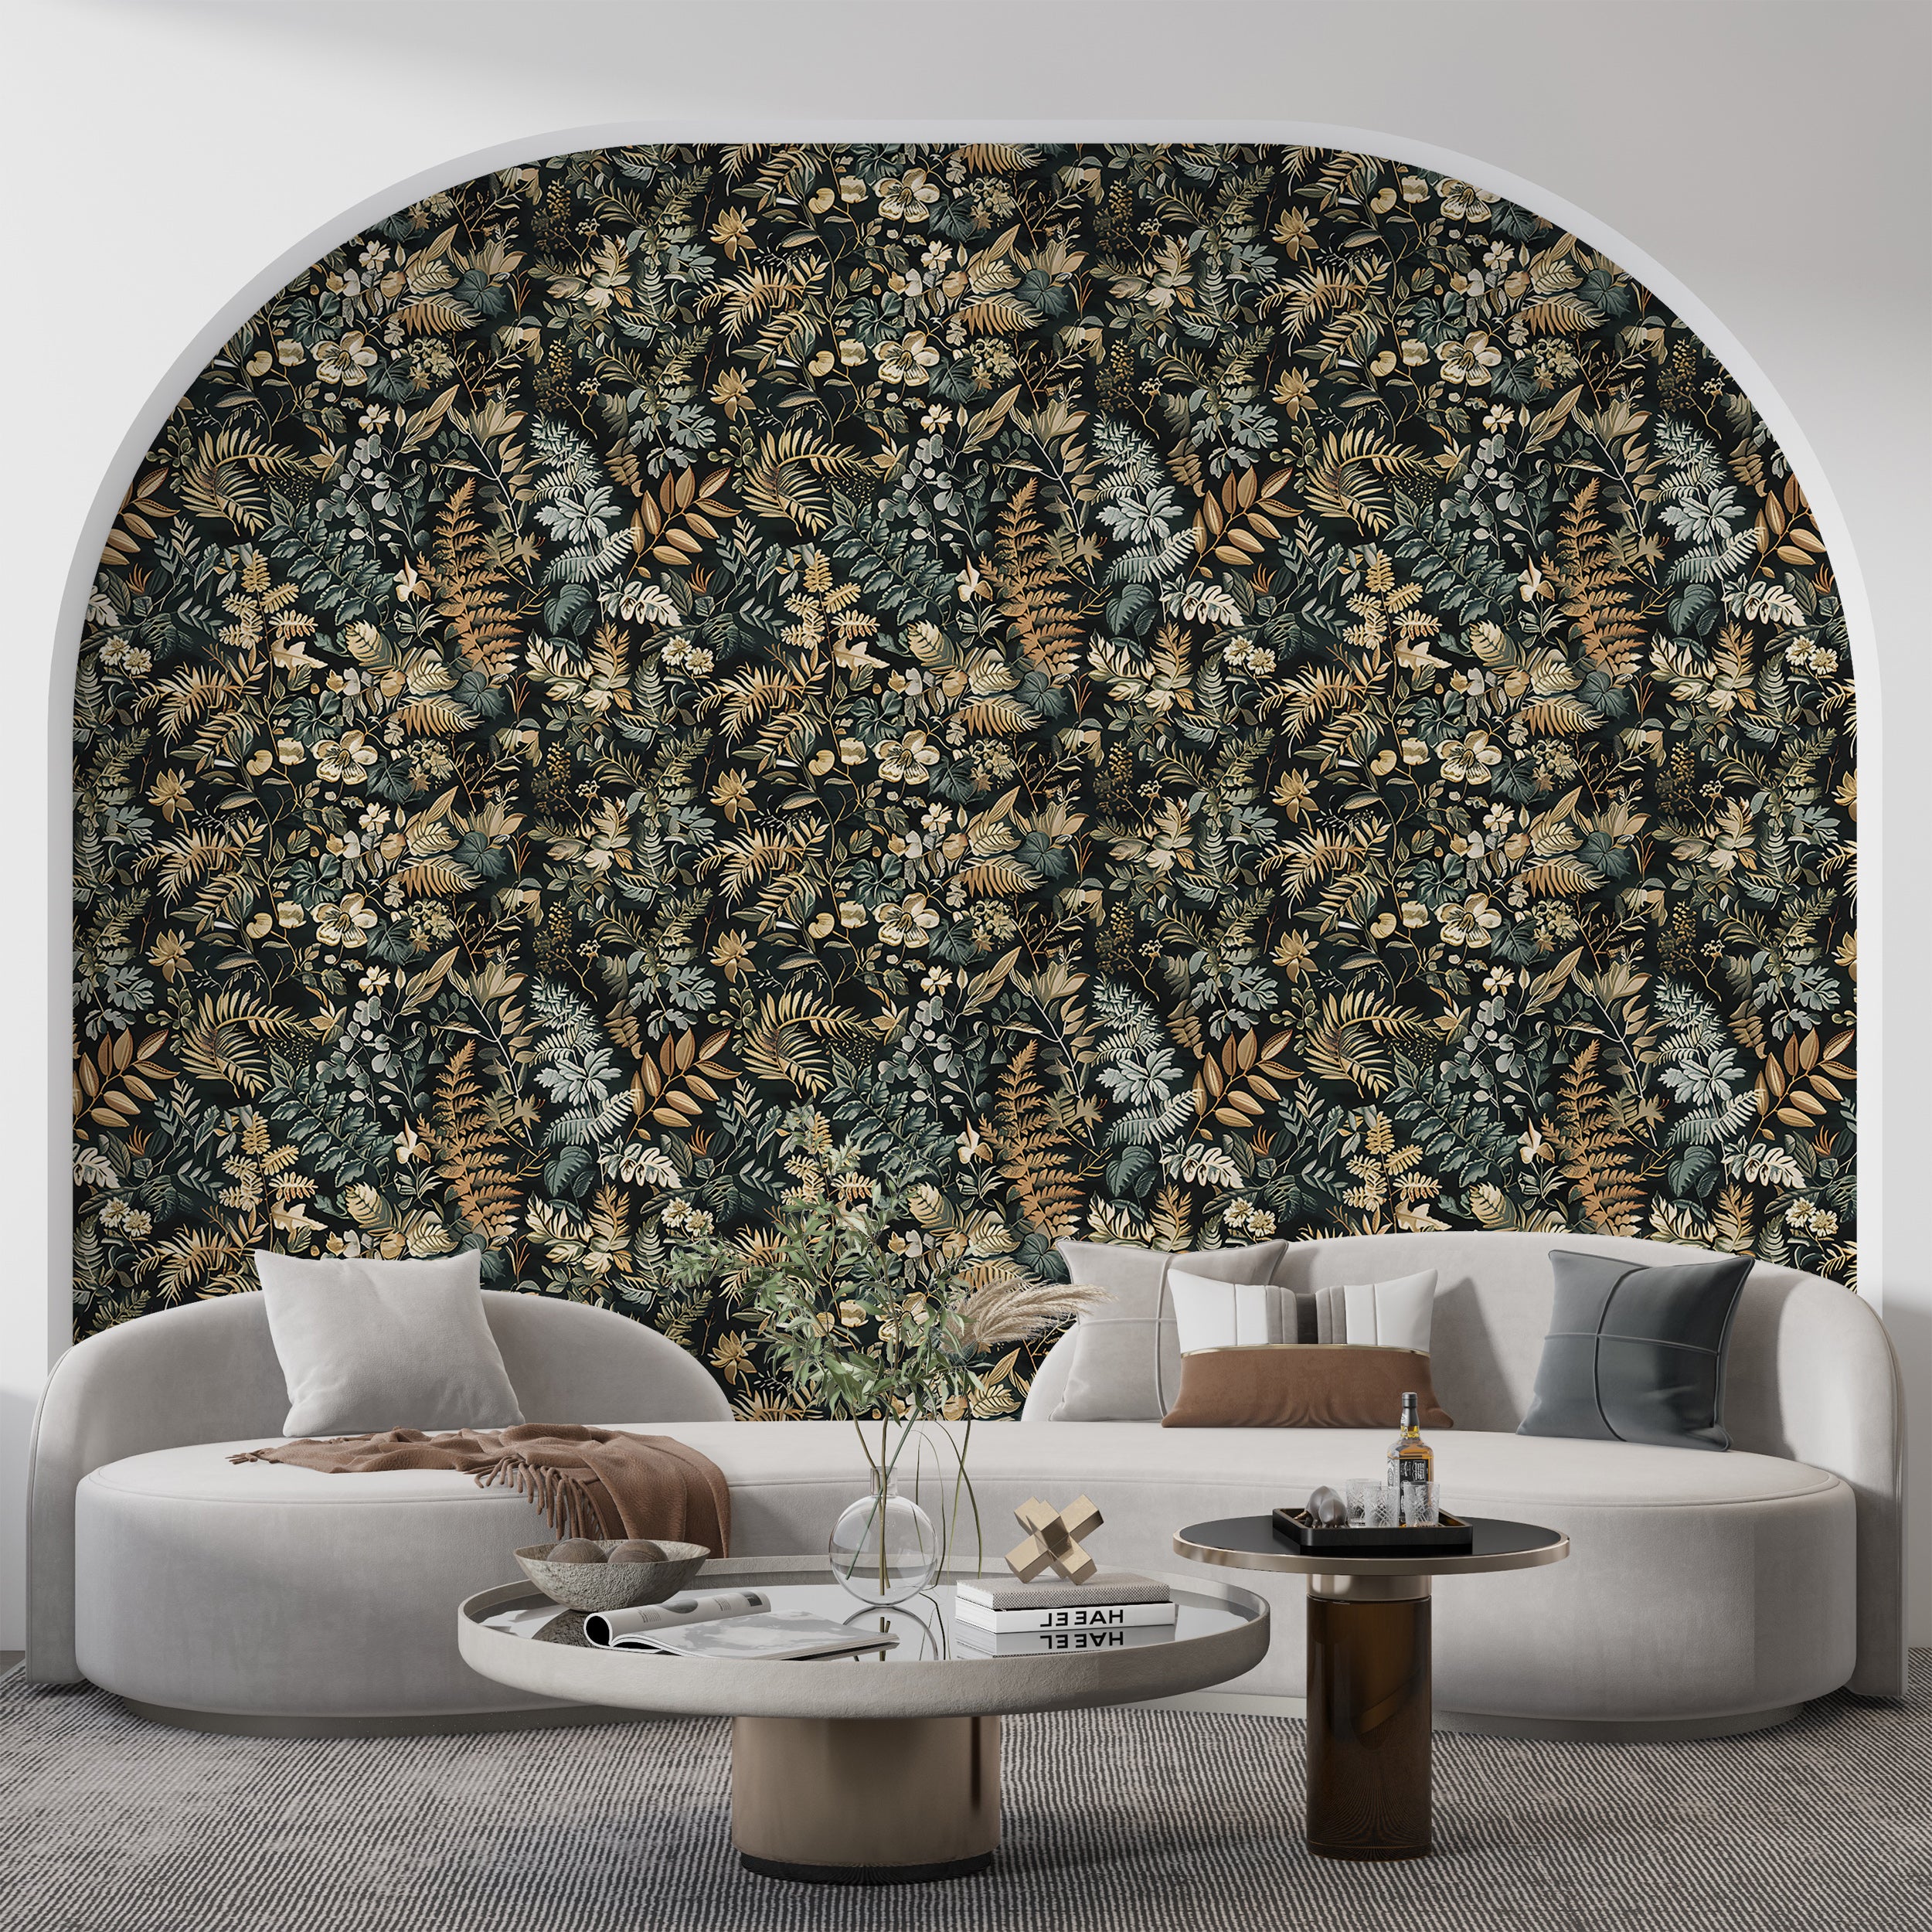 Dark Floral Wallpaper, Peel and Stick Fern Pattern Decal, Wild Flowers and Leaves Wall Decor, Removable Dark Botanical Forest Flower Wallpaper